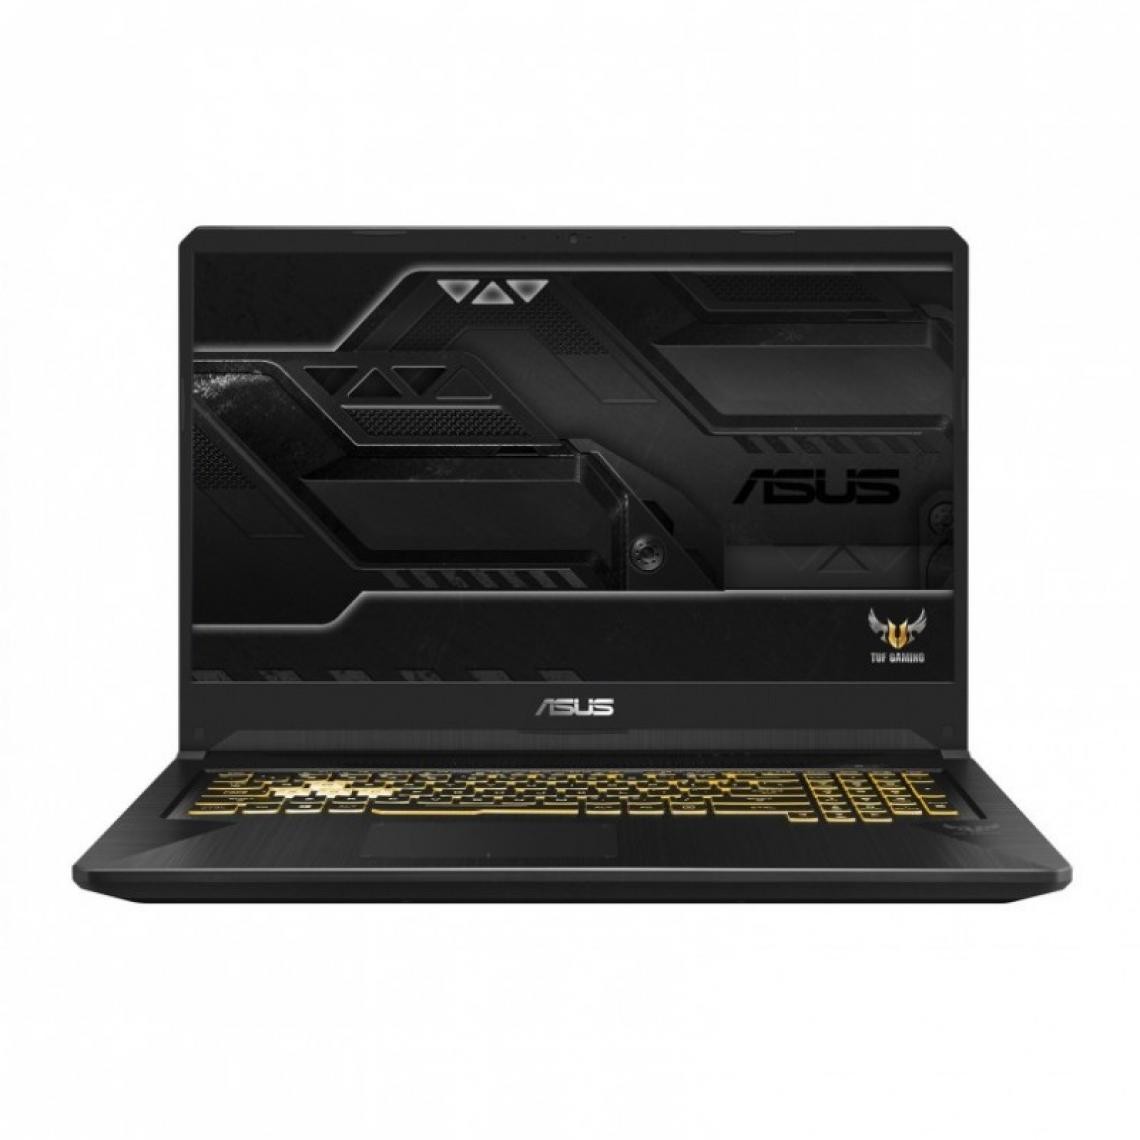 Asus - Asus TUF Gaming TUF765GM-EW127T 17" Core i7 2,2 Ghz - Ssd 256 Go + Hdd 1 To - 8 Go - Nvidia GeForce GTX 1060 Azerty - Français - PC Portable Gamer